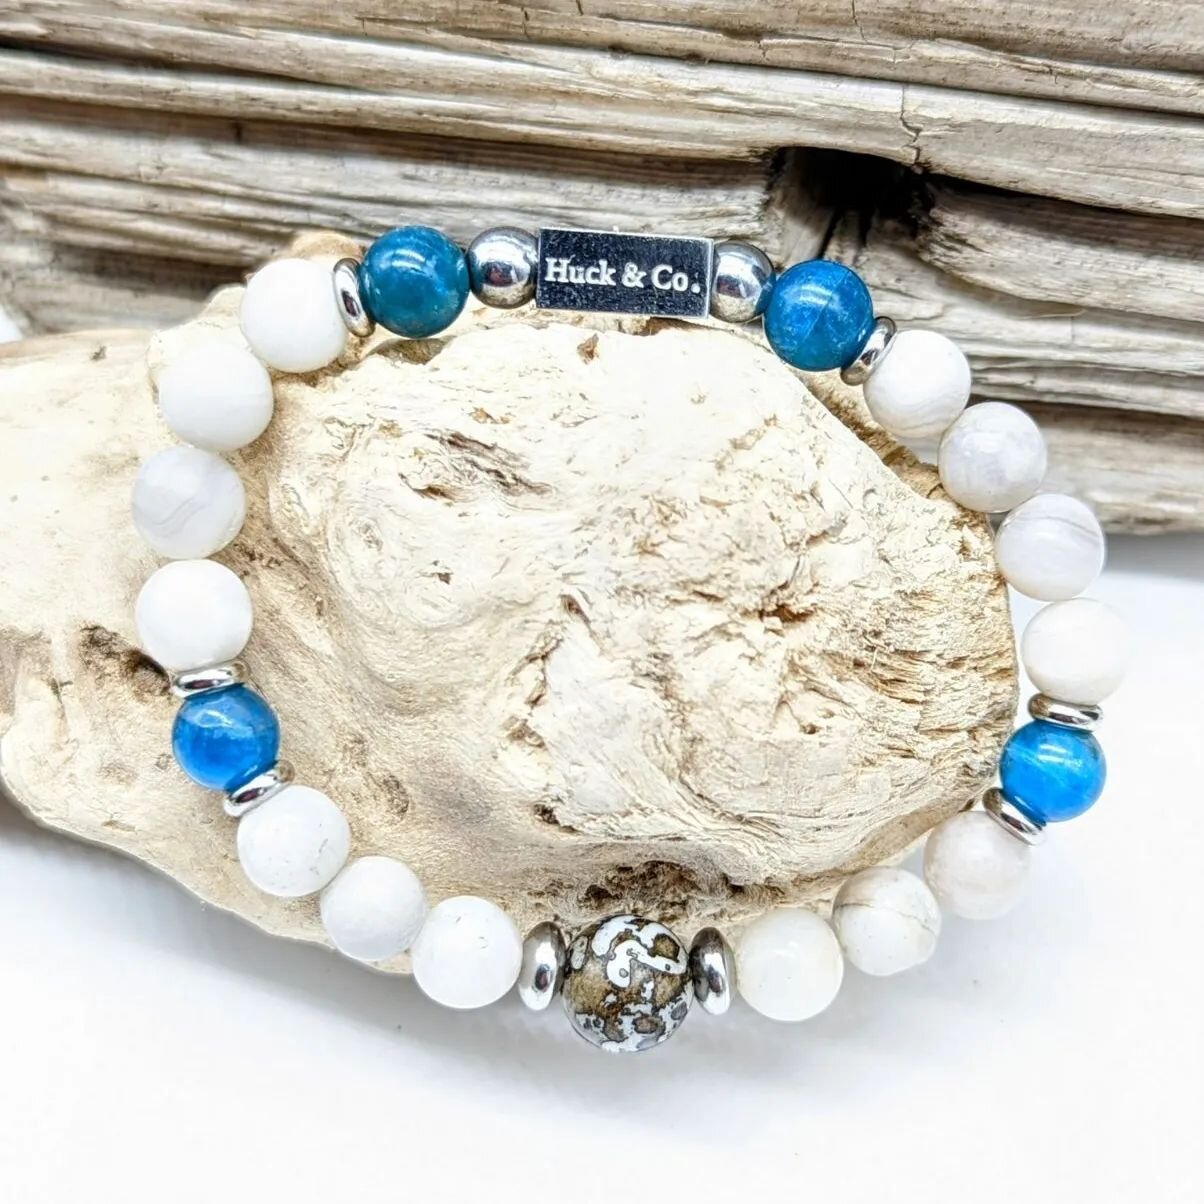 Mother's day is here
Place your orders today... White agate for finding our true voice and relief of trauma.  Apatite for deepened meditation and insight. &quot;I am the lotus within&quot; carved conch  shell from Thailand. 
#lawofattraction #handmad